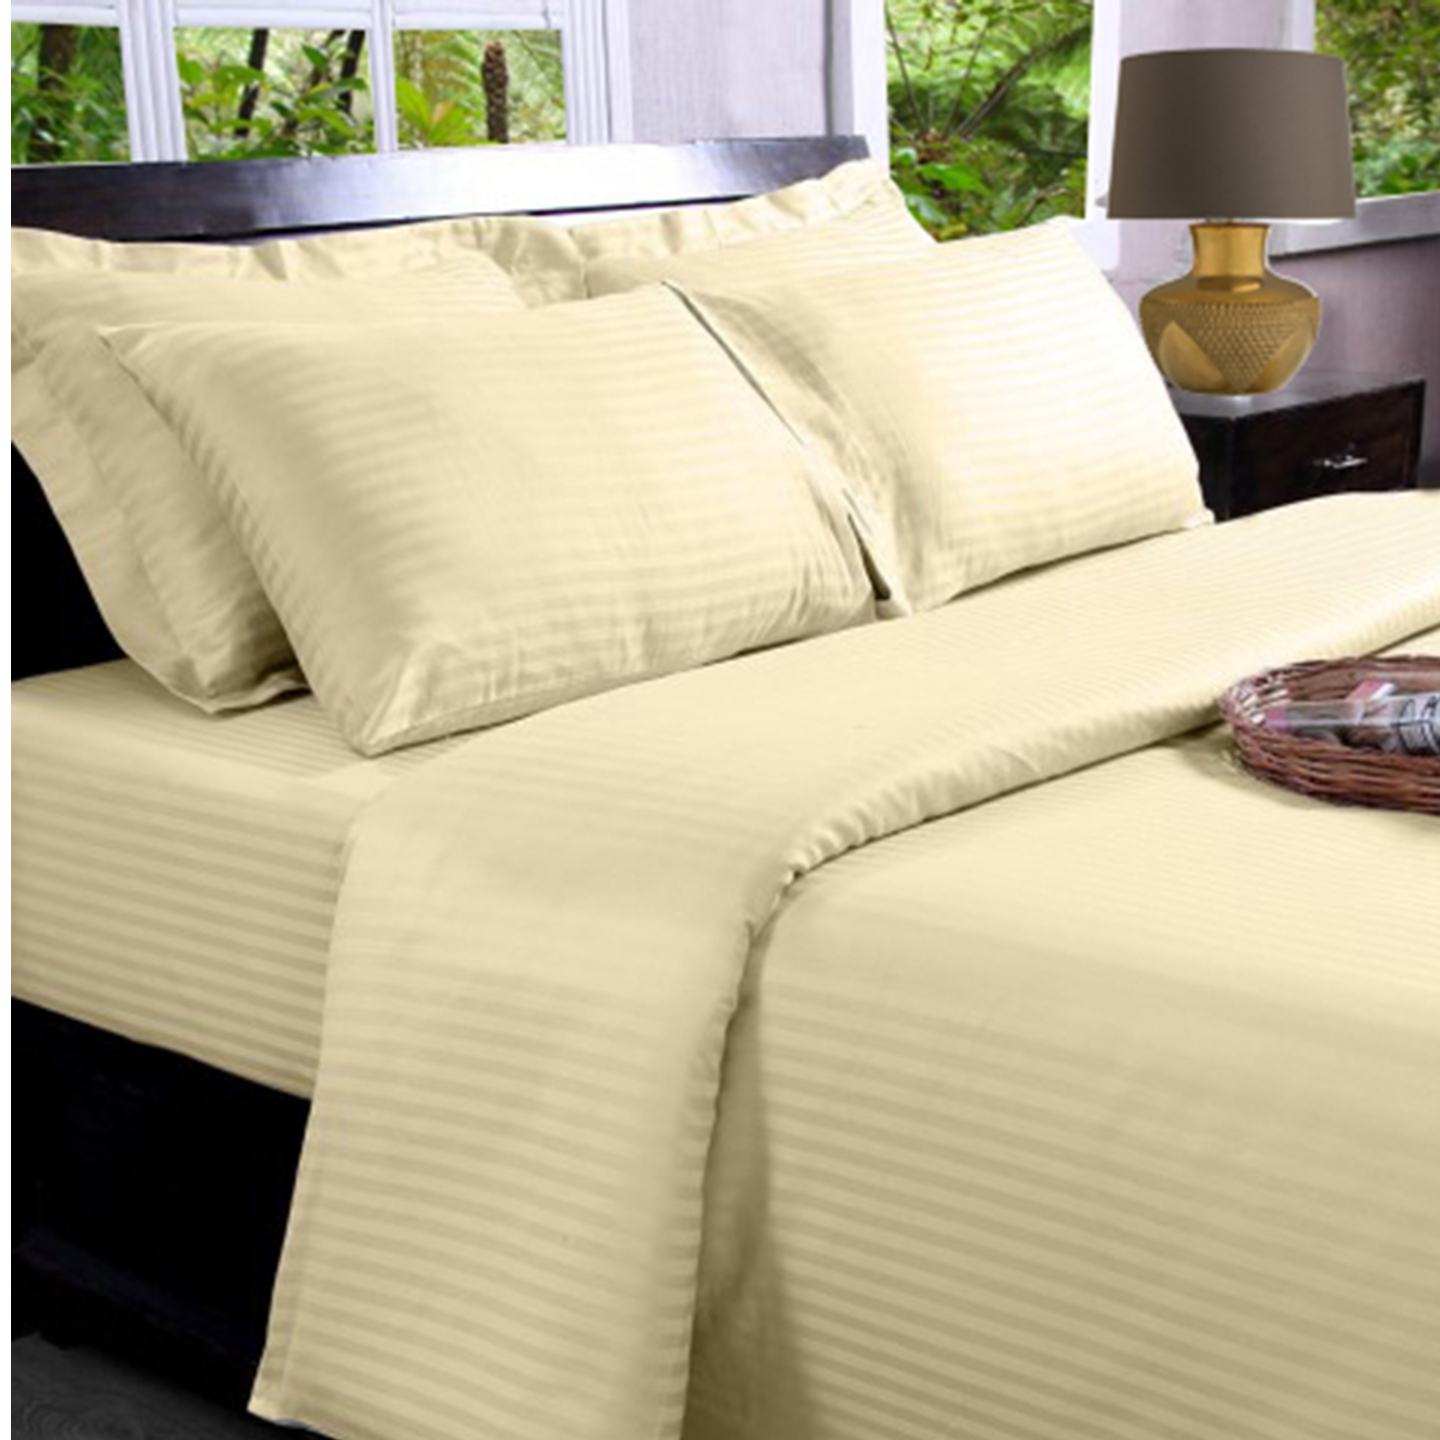 Pastel Butter Yellow  - 100% Cotton - 330 Thread Count Sateen Fitted Sheets -  Queen Size